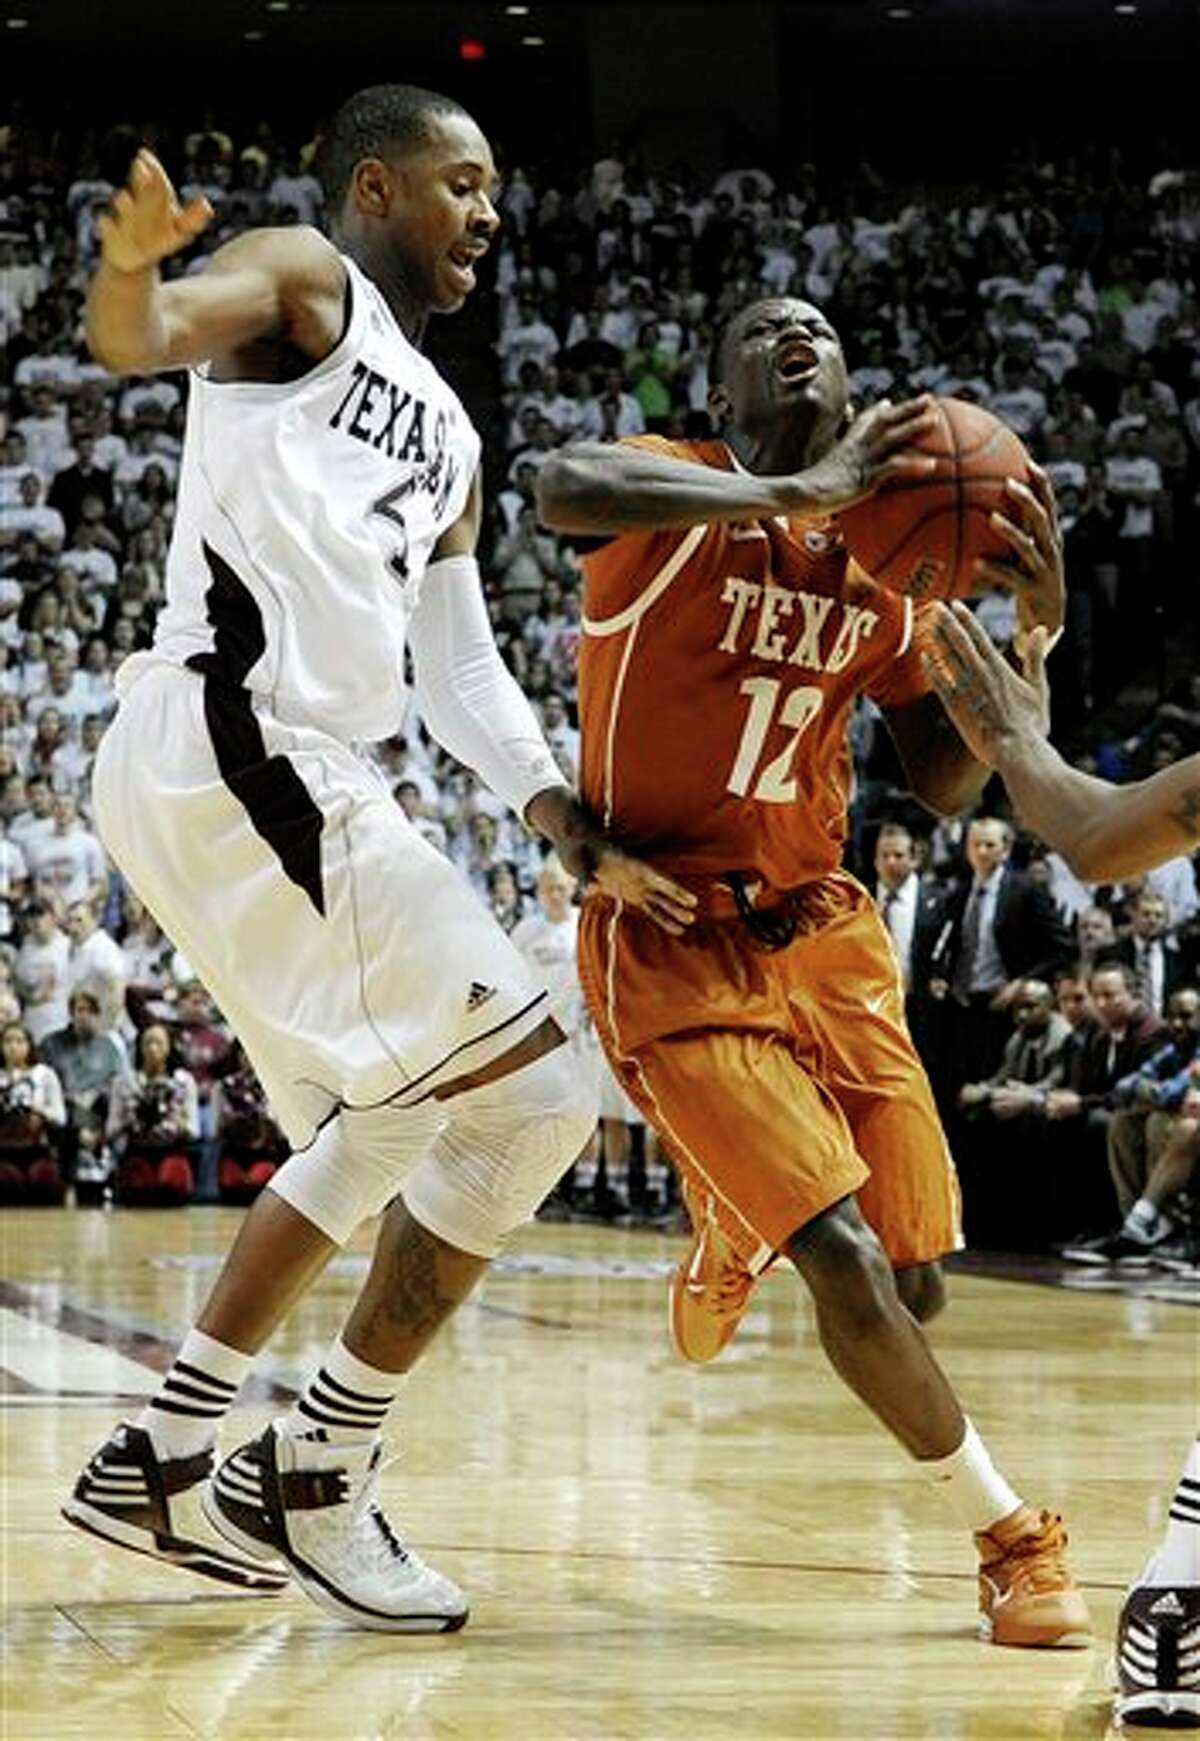 Texas' Myck Kabongo (12) works against Texas A&M's Keith Davis (4) in the second half of an NCAA college basketball game Monday, Feb. 6, 2012, in College Station, Texas. Texas won 70-68. (AP Photo/Pat Sullivan)